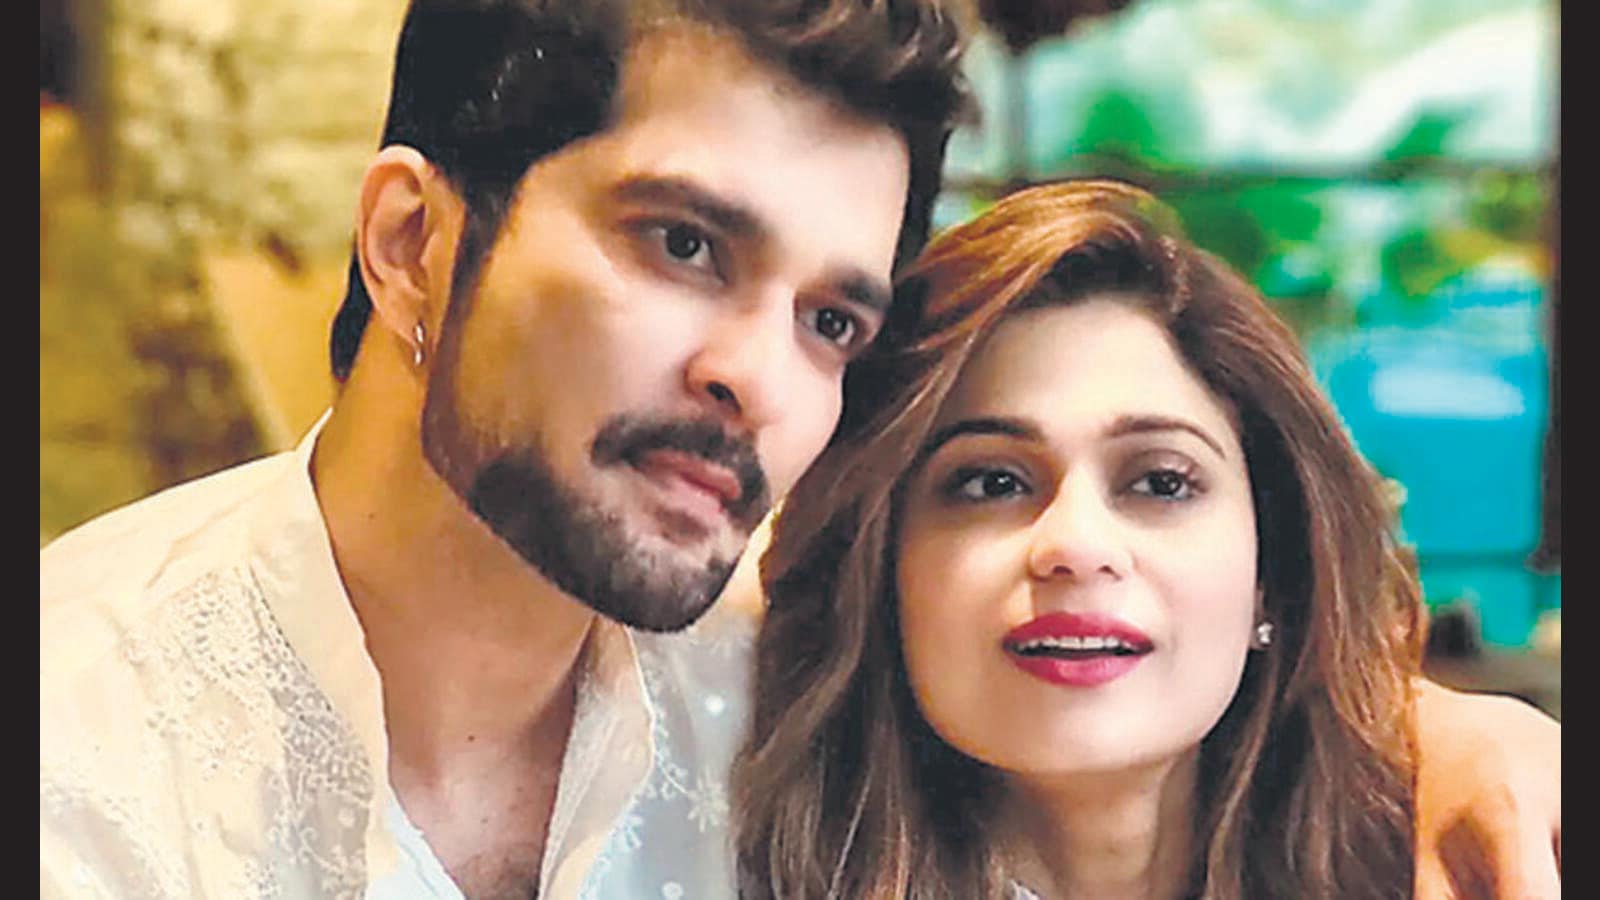 Shamita Shetty: Raqesh and I make effort to not let rumours affect our relationship